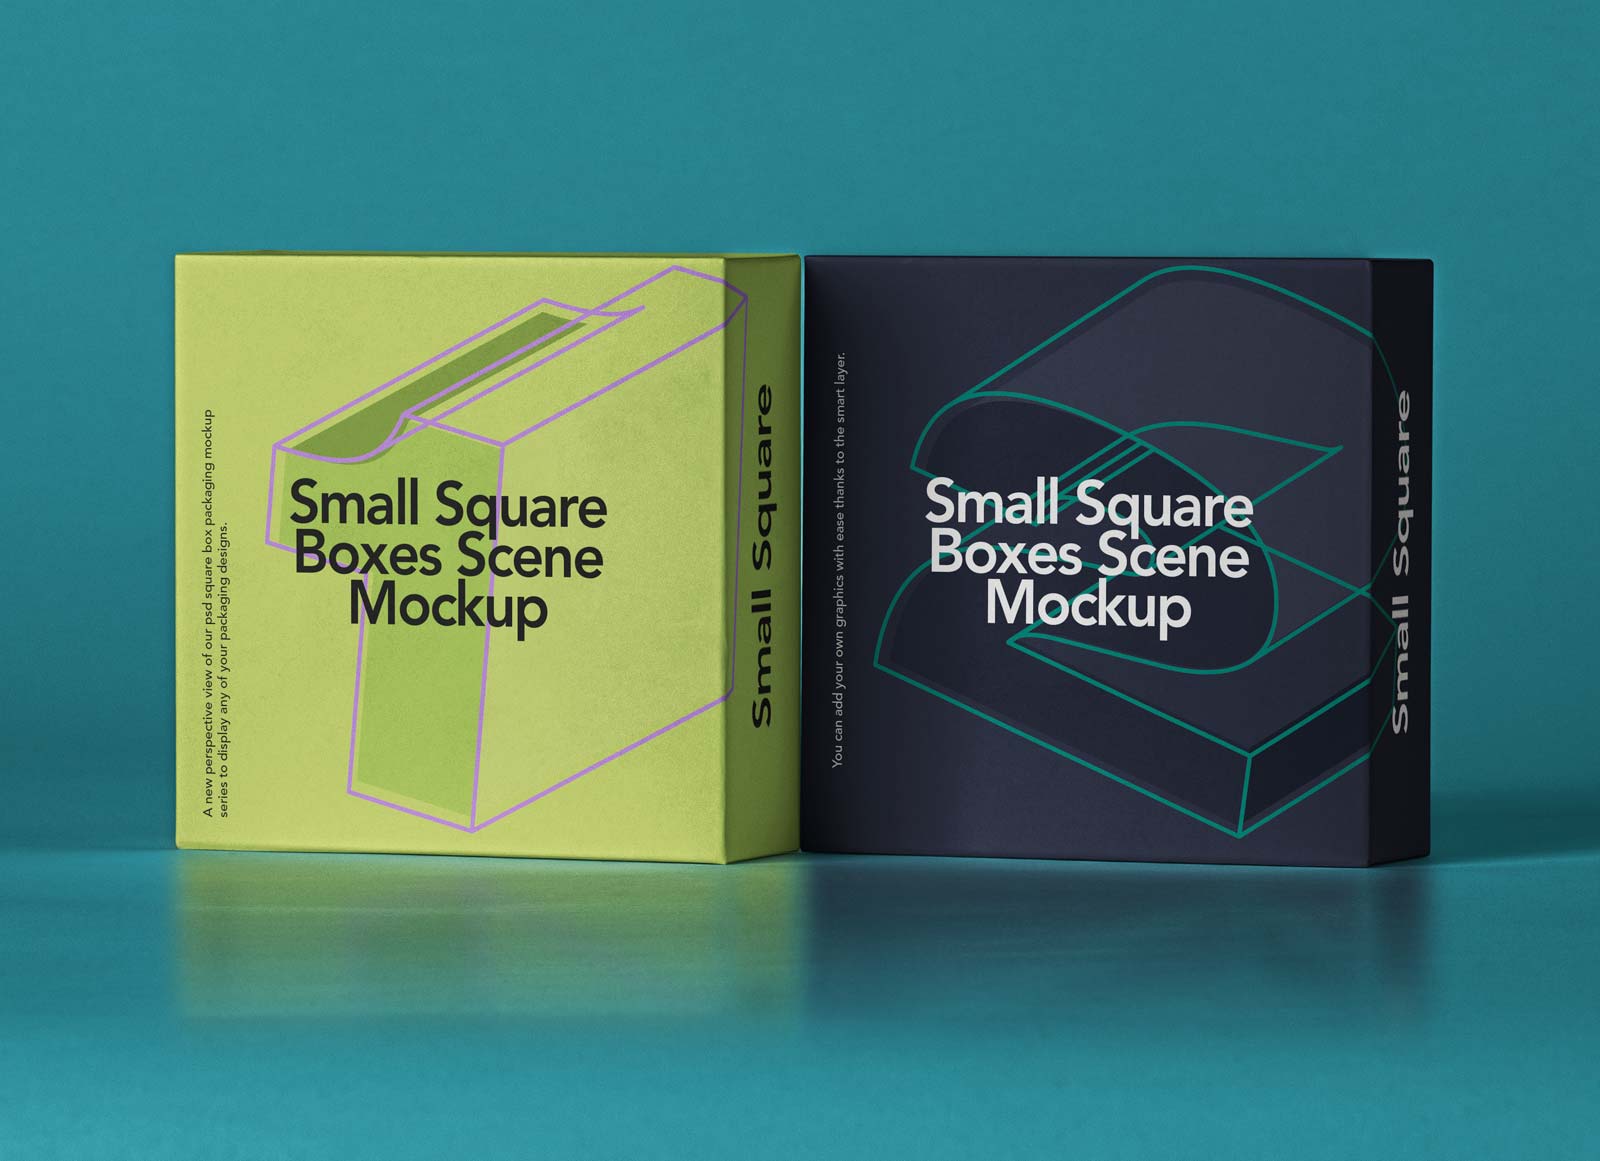 Small Square Boxes Packaging Mockup